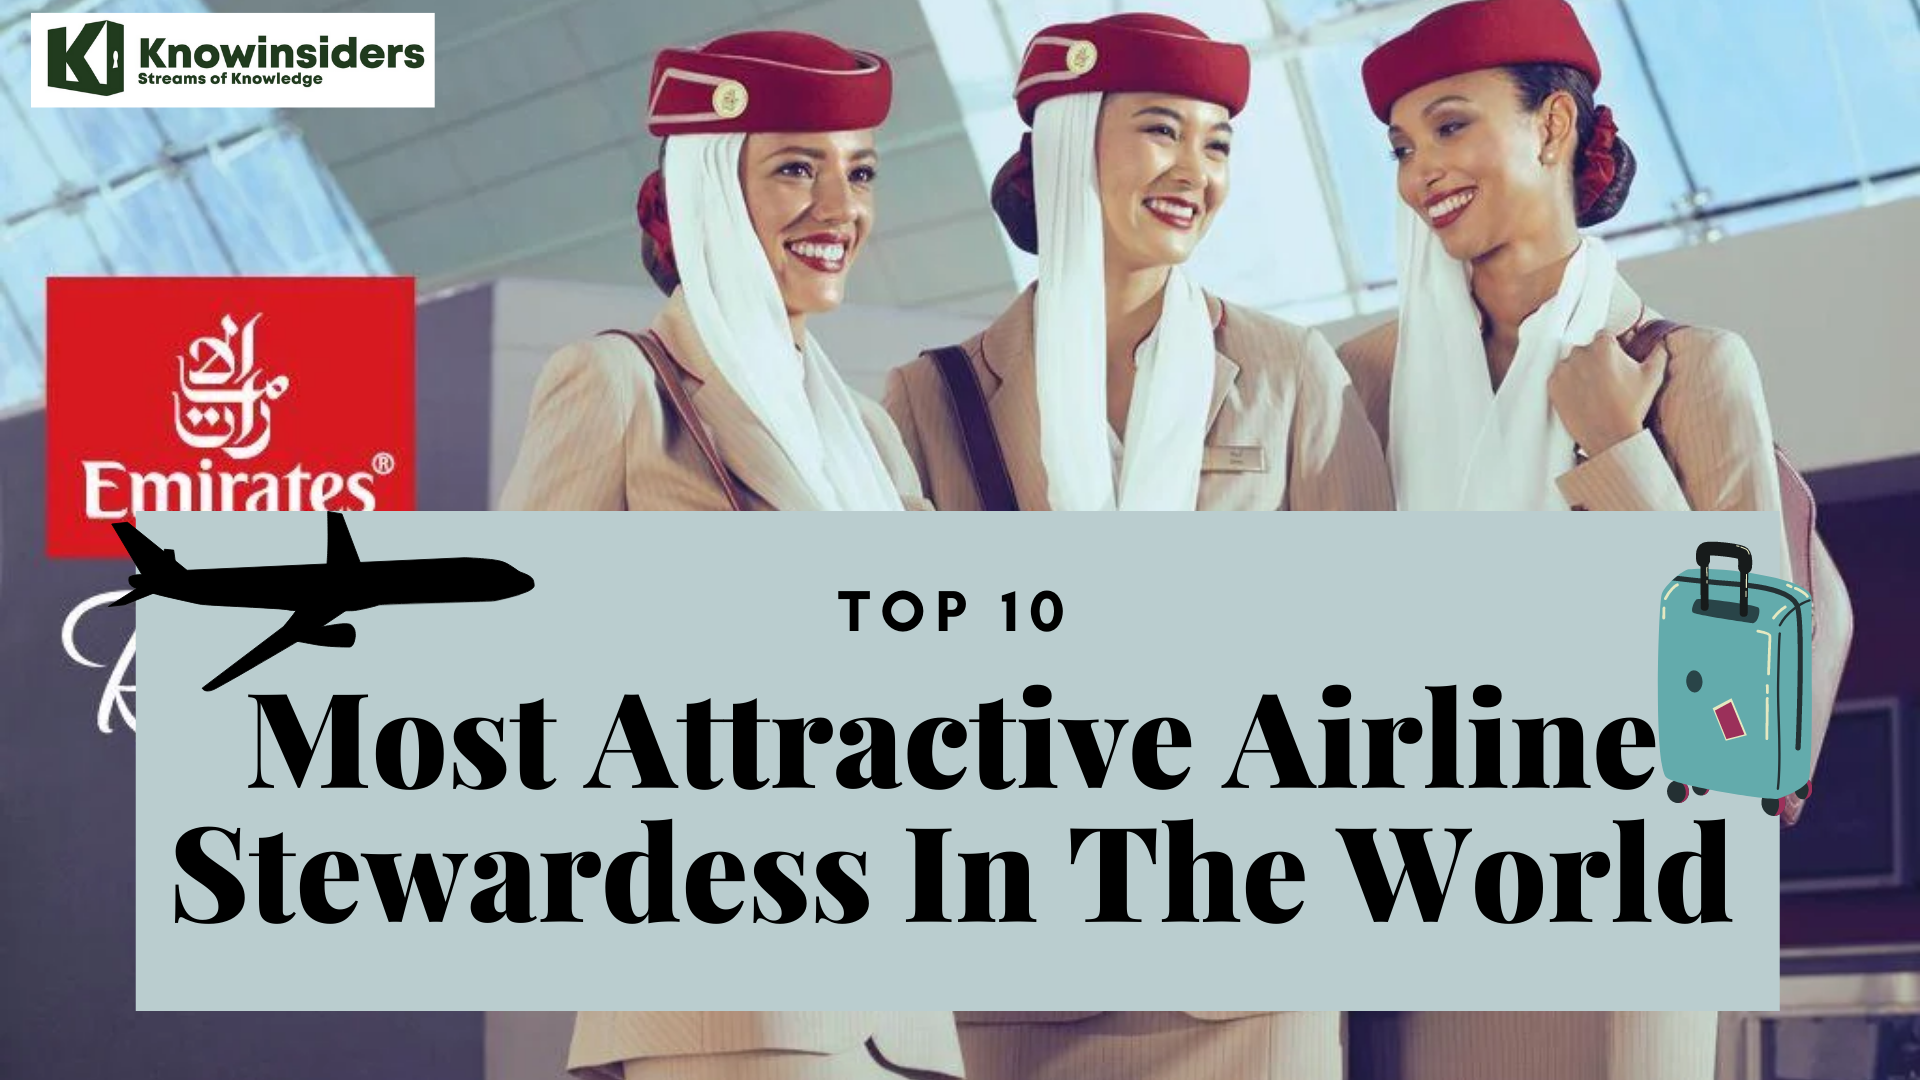 Top 10 AirLines With The Most Beautiful Flight Attendants in The World